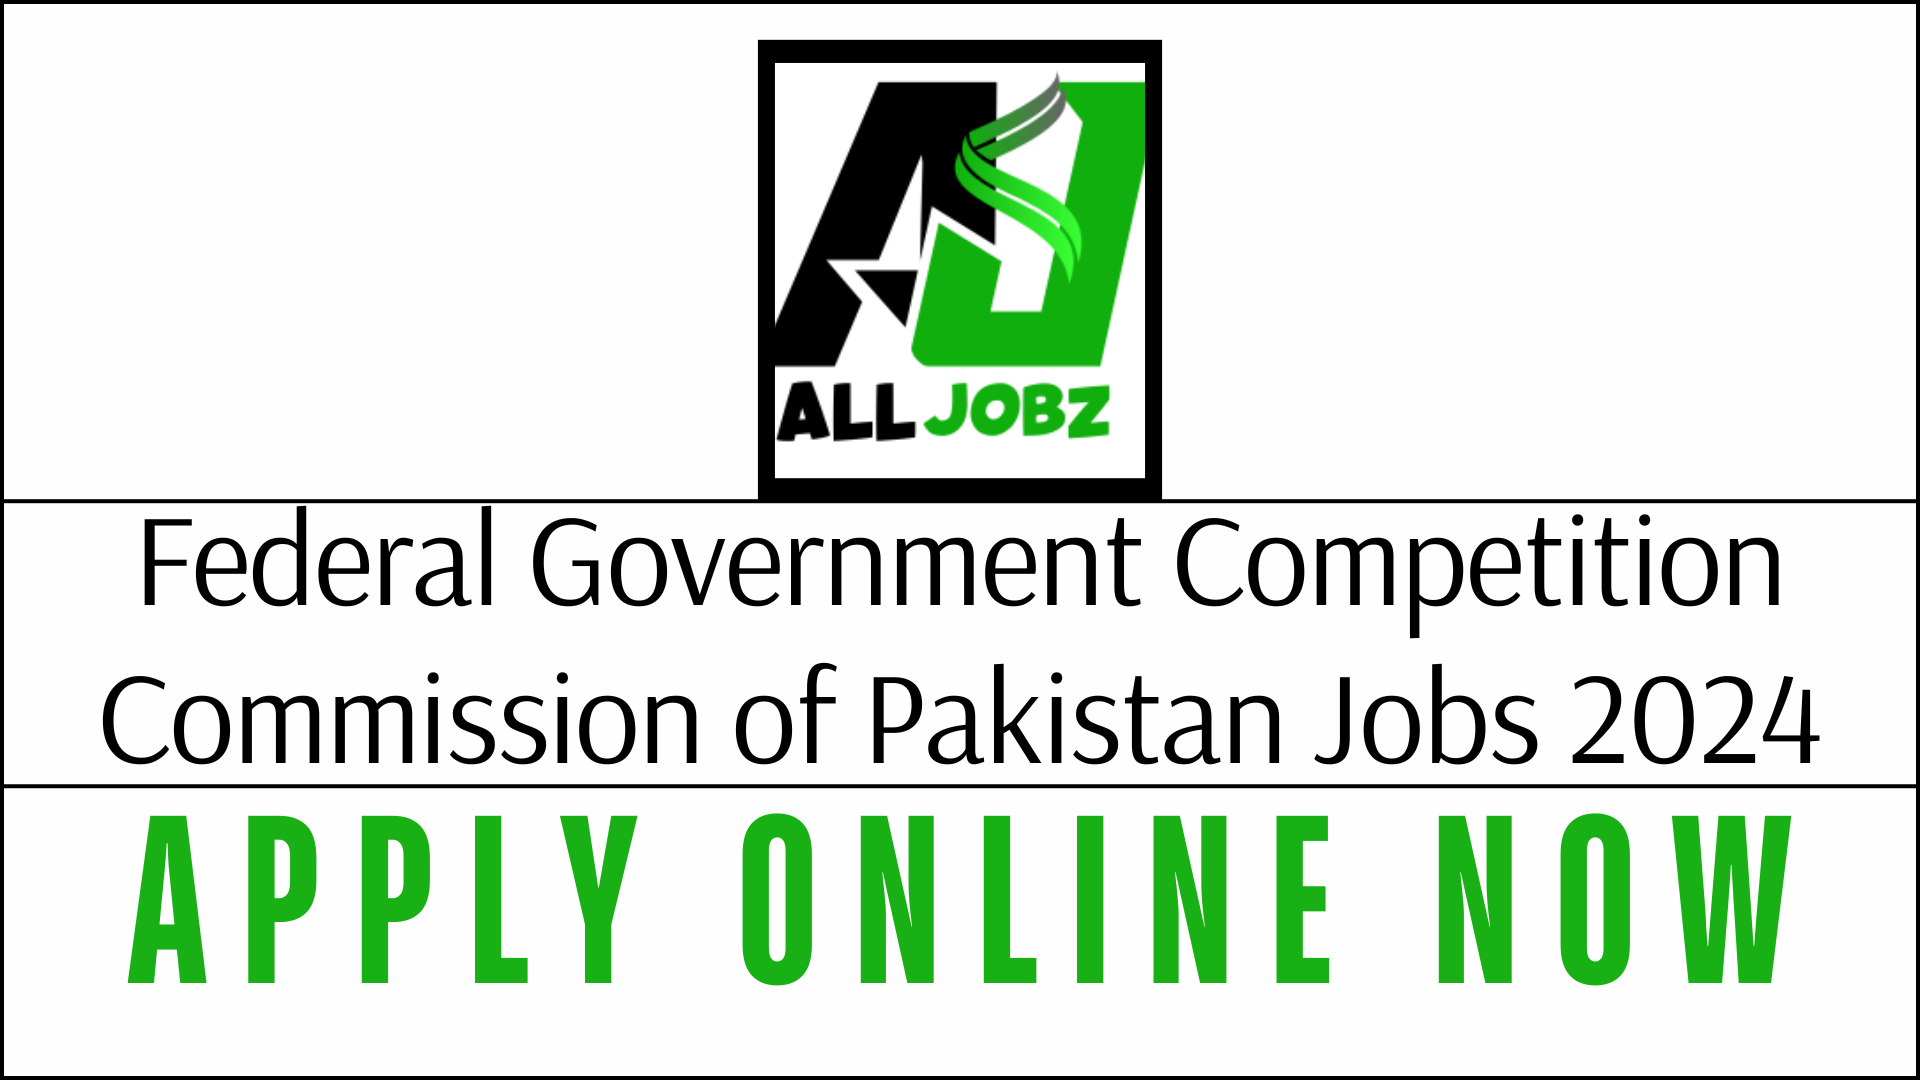 Federal Government Competition Commission Of Pakistan Jobs 2024 For International Relations Officer, Pakistan Government Competition Commission Of Pakistan Jobs 2024 Last Date, Pakistan Government Competition Commission Of Pakistan Jobs 2024 Apply Online, Competition Commission Of Pakistan Salary, Jobs In Competition Commission Of Pakistan, Competition Commission Of Pakistan Jobs Address, Competition Commission Of Pakistan Jobs 2024 Sindh, Competition Commission Of Pakistan Jobs 2024 Last Date, Competition Commission Of Pakistan Jobs 2024 Karachi, Competition Commission Of Pakistan Jobs 2024 Apply Online,